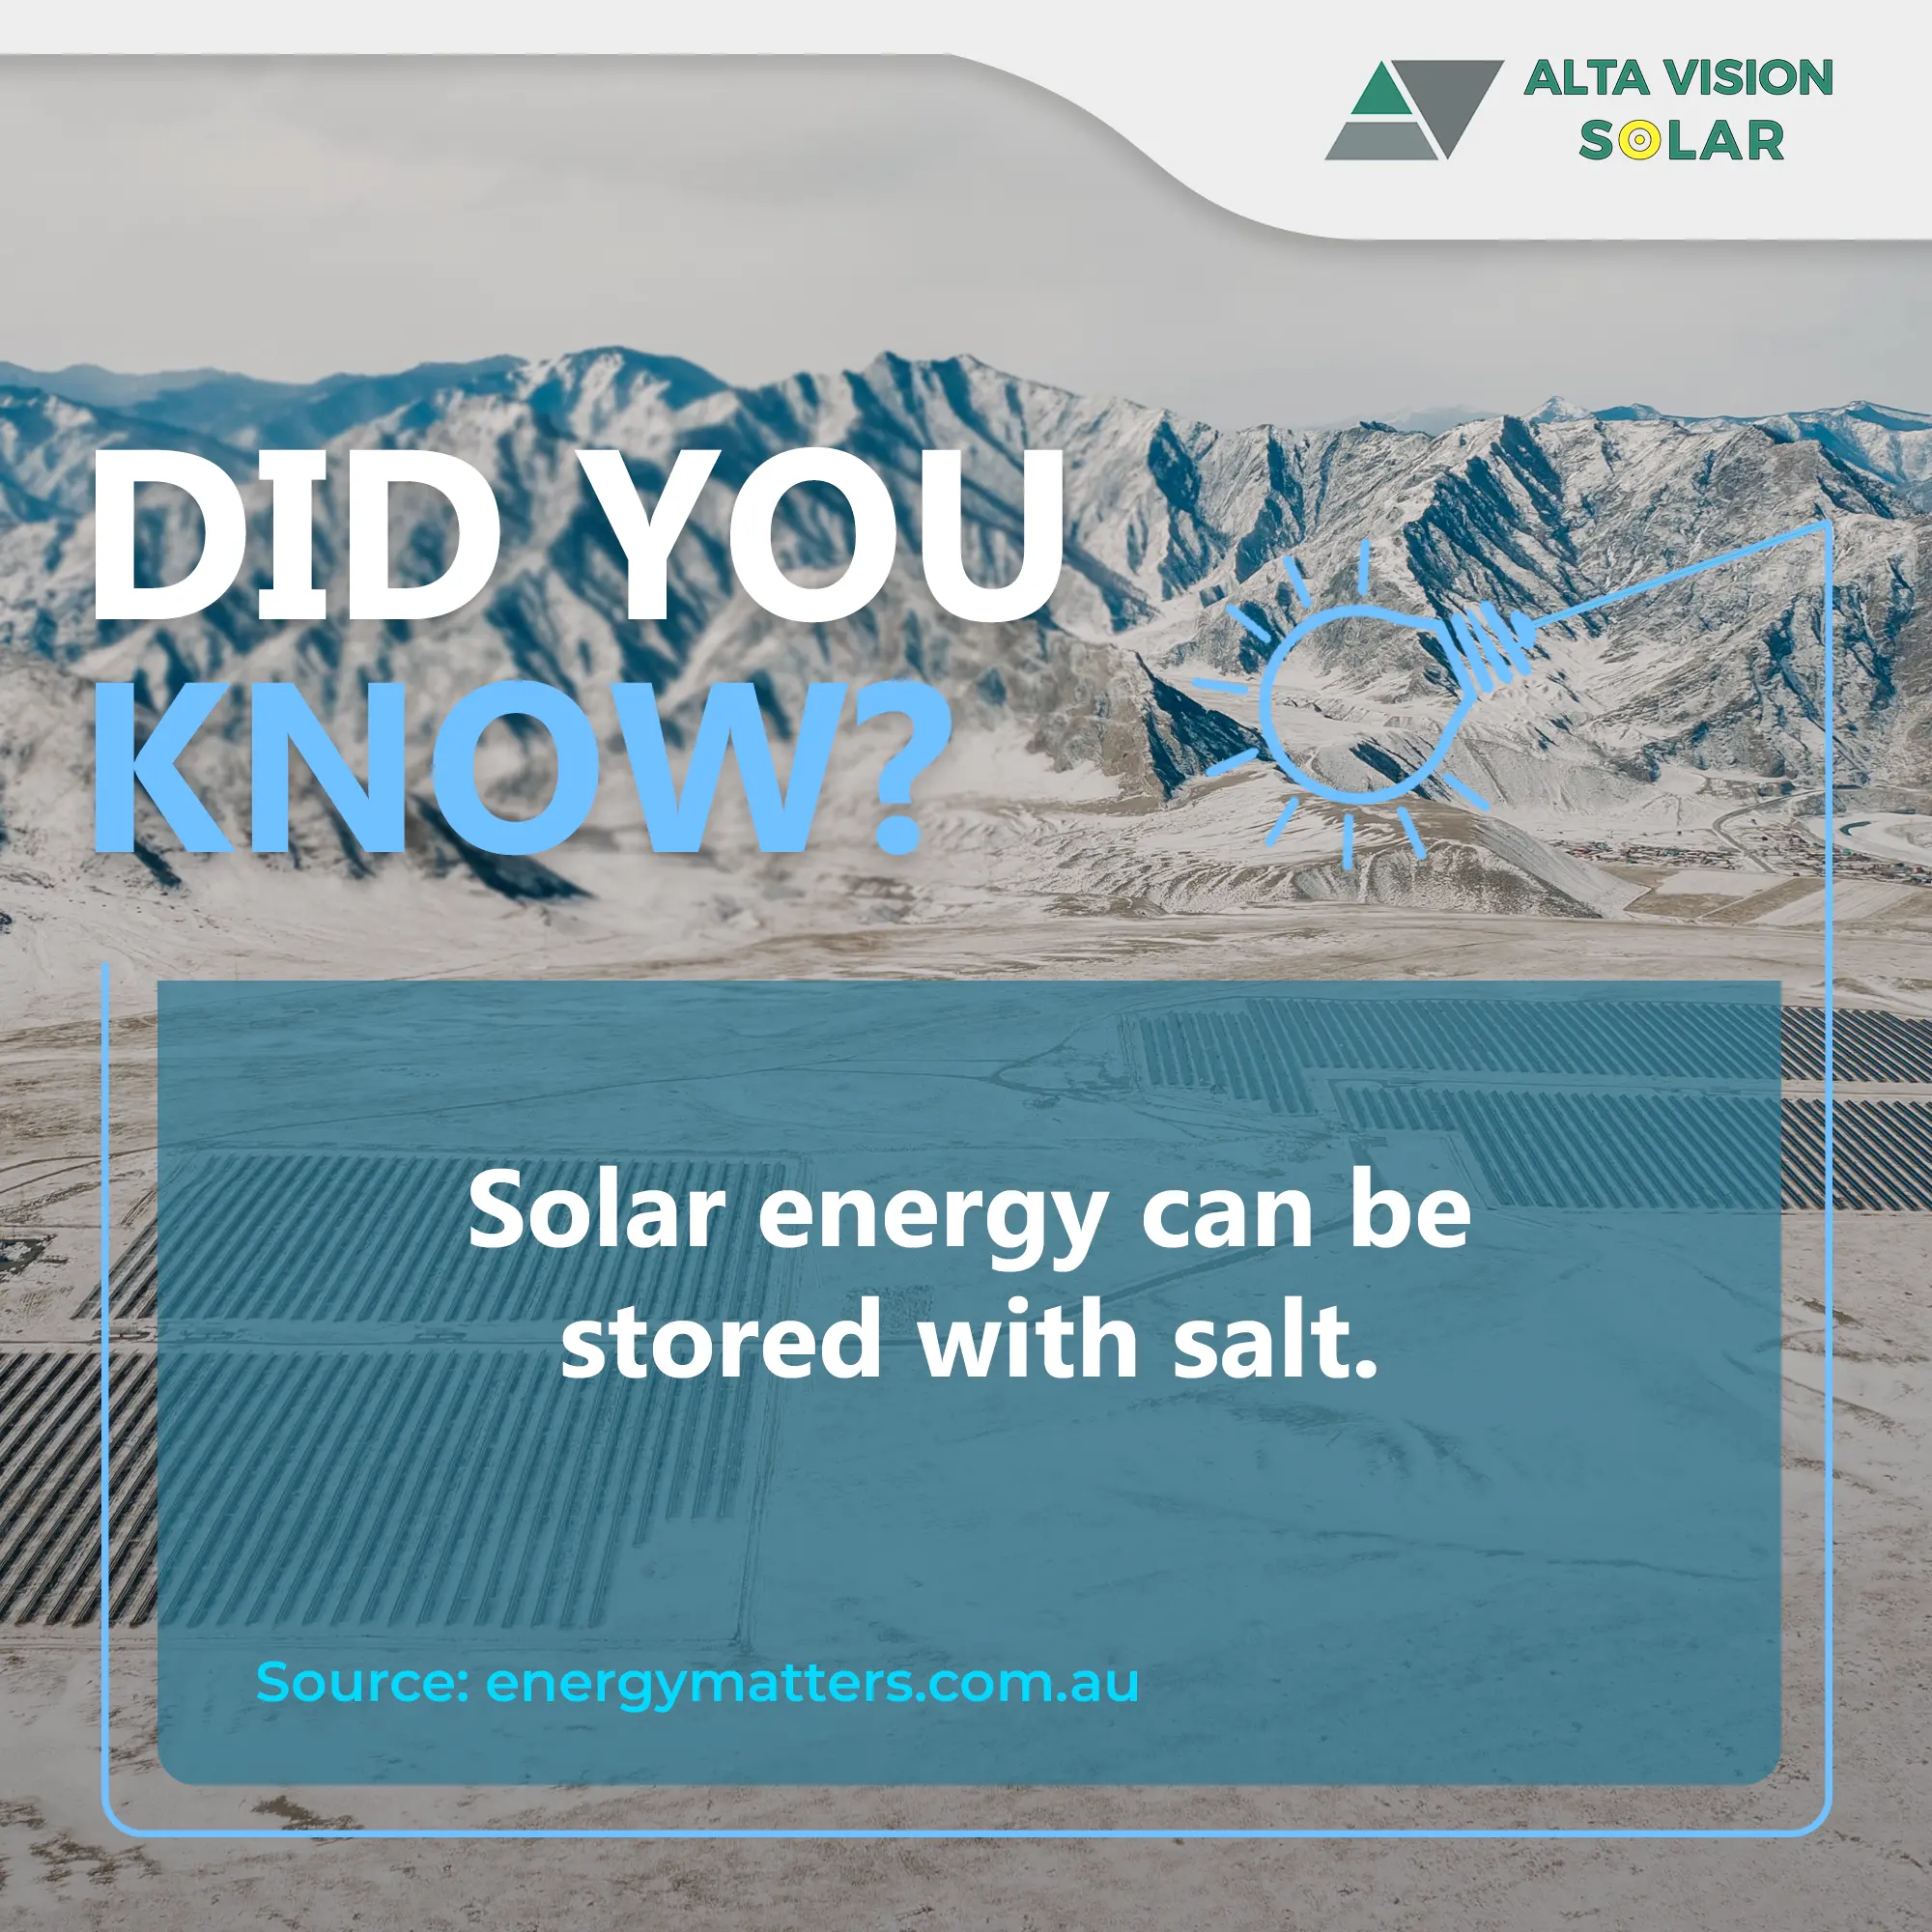 Solar energy can be stored with salt